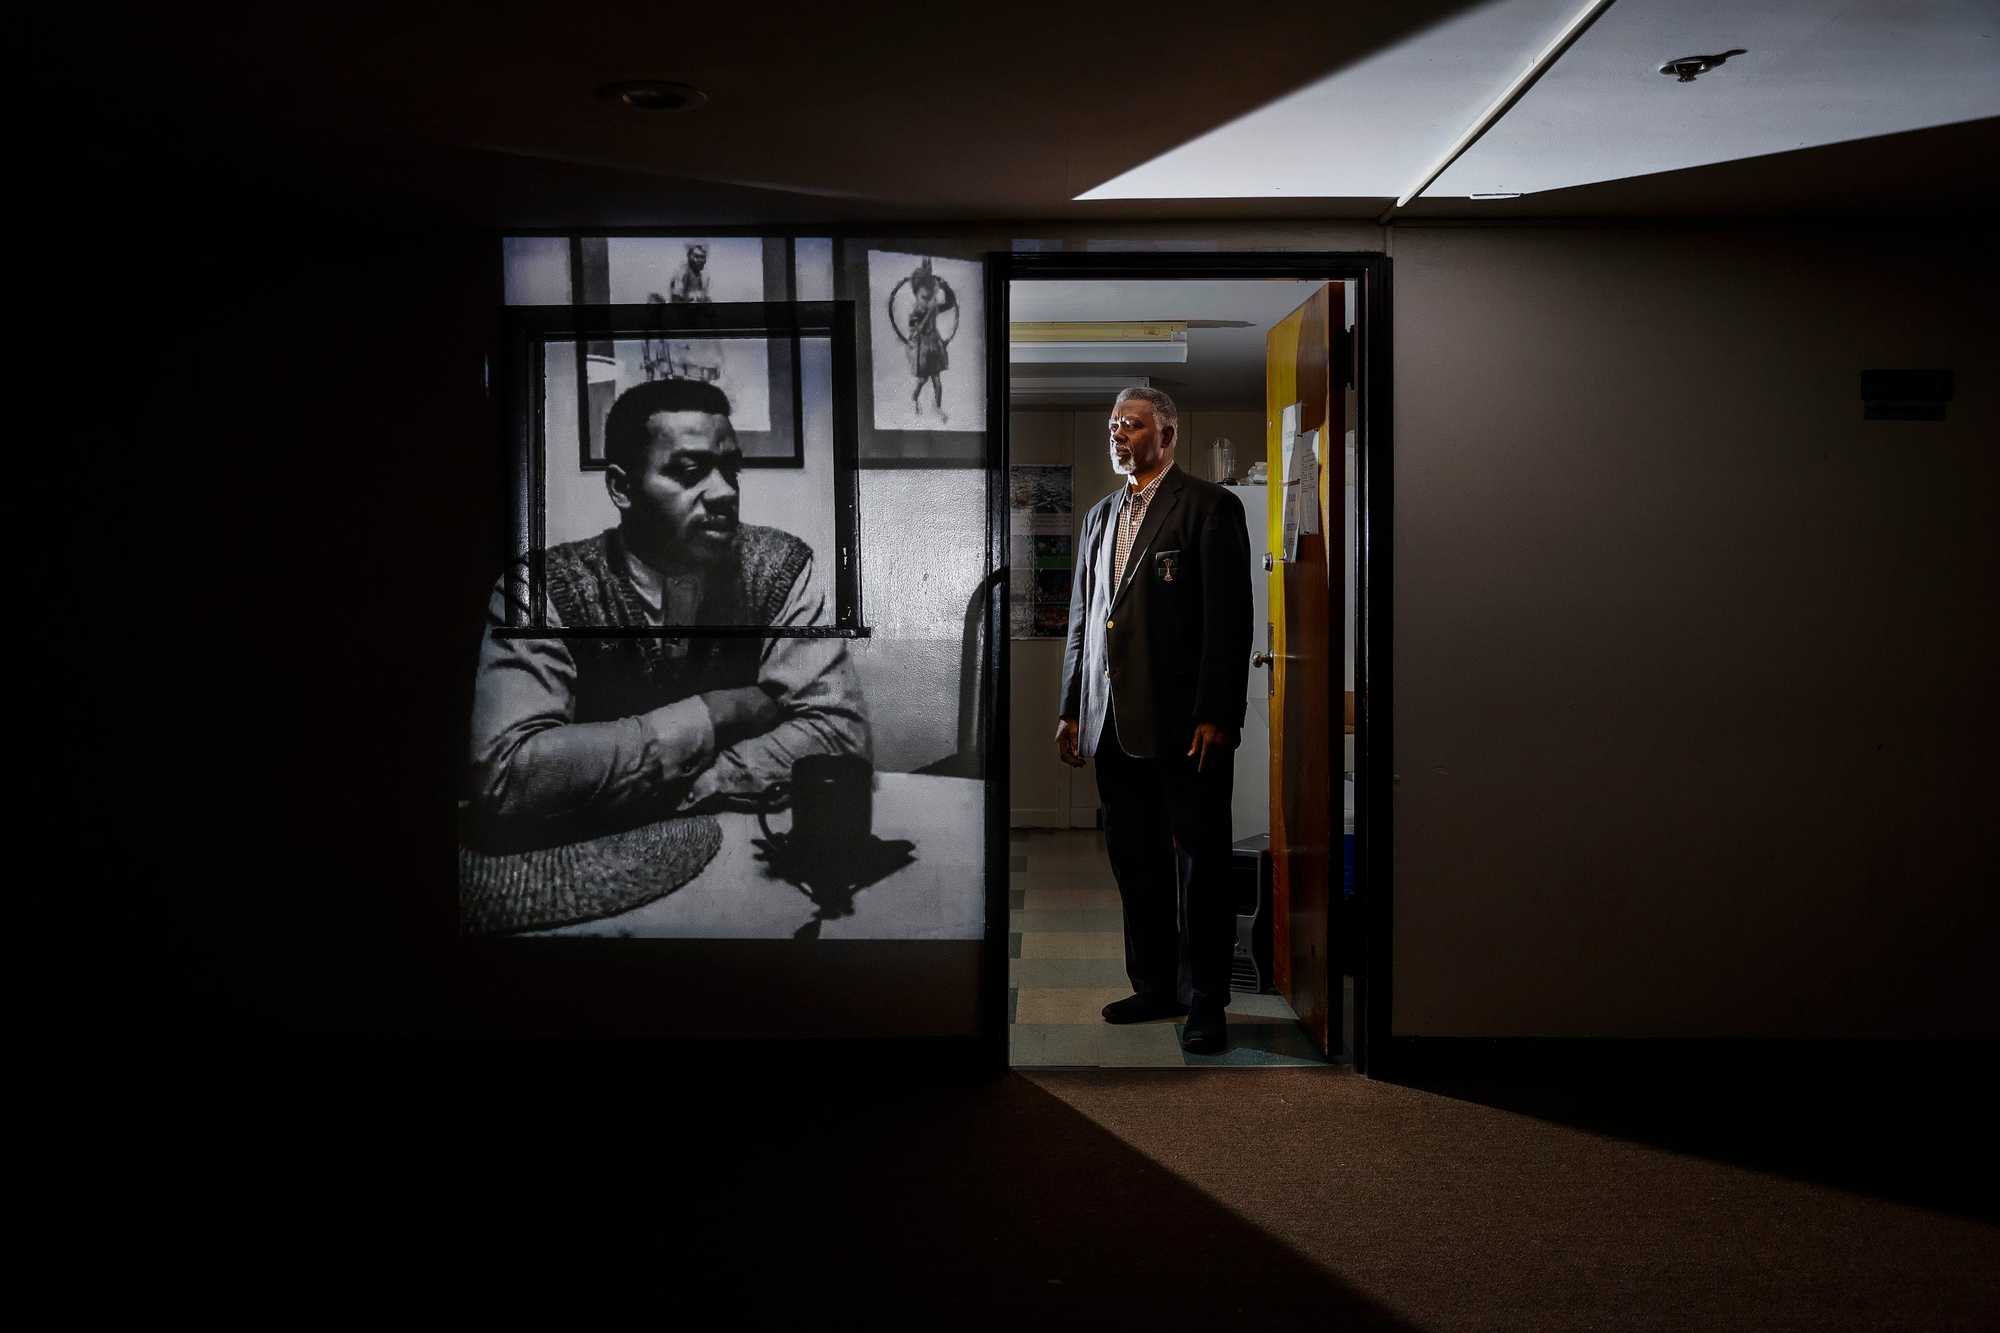  Louis Elisa, former president of the Boston chapter of the NAACP, standing at Prince Hall Grand Lodge near a projection of a photo himself speaking about the Stuart murder in 1990. Louis had been at a dinner of Free Masons when the shooting happened, and he headed straight to the Roxbury district police station after hearing the details. When he arrived, he saw officers already assembling with riot shields. 

